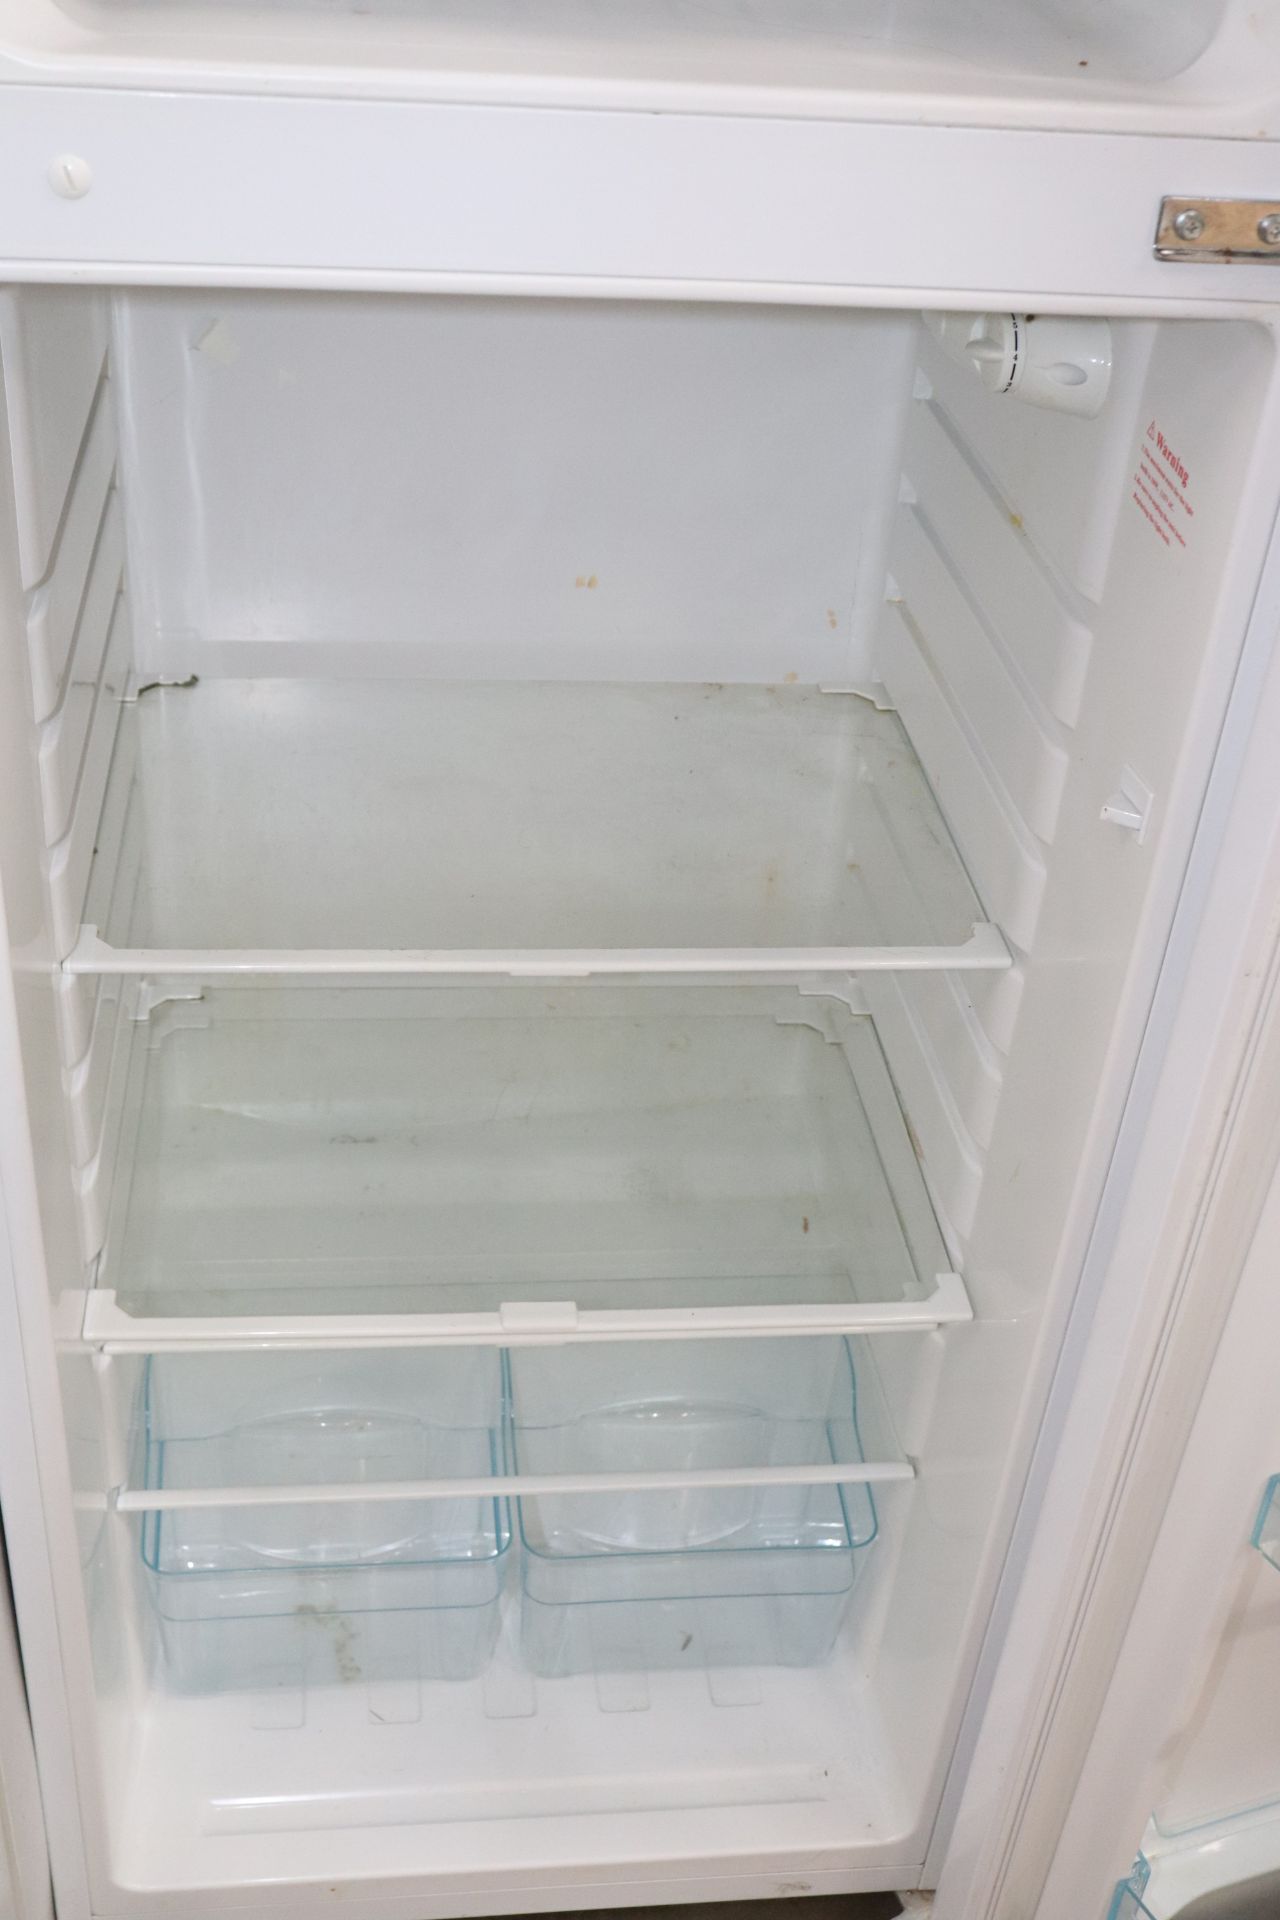 Criterion Combination Freezer/Refrigerator, Model CTMR73A1W, Serial A57779707351581000027 - Image 2 of 7